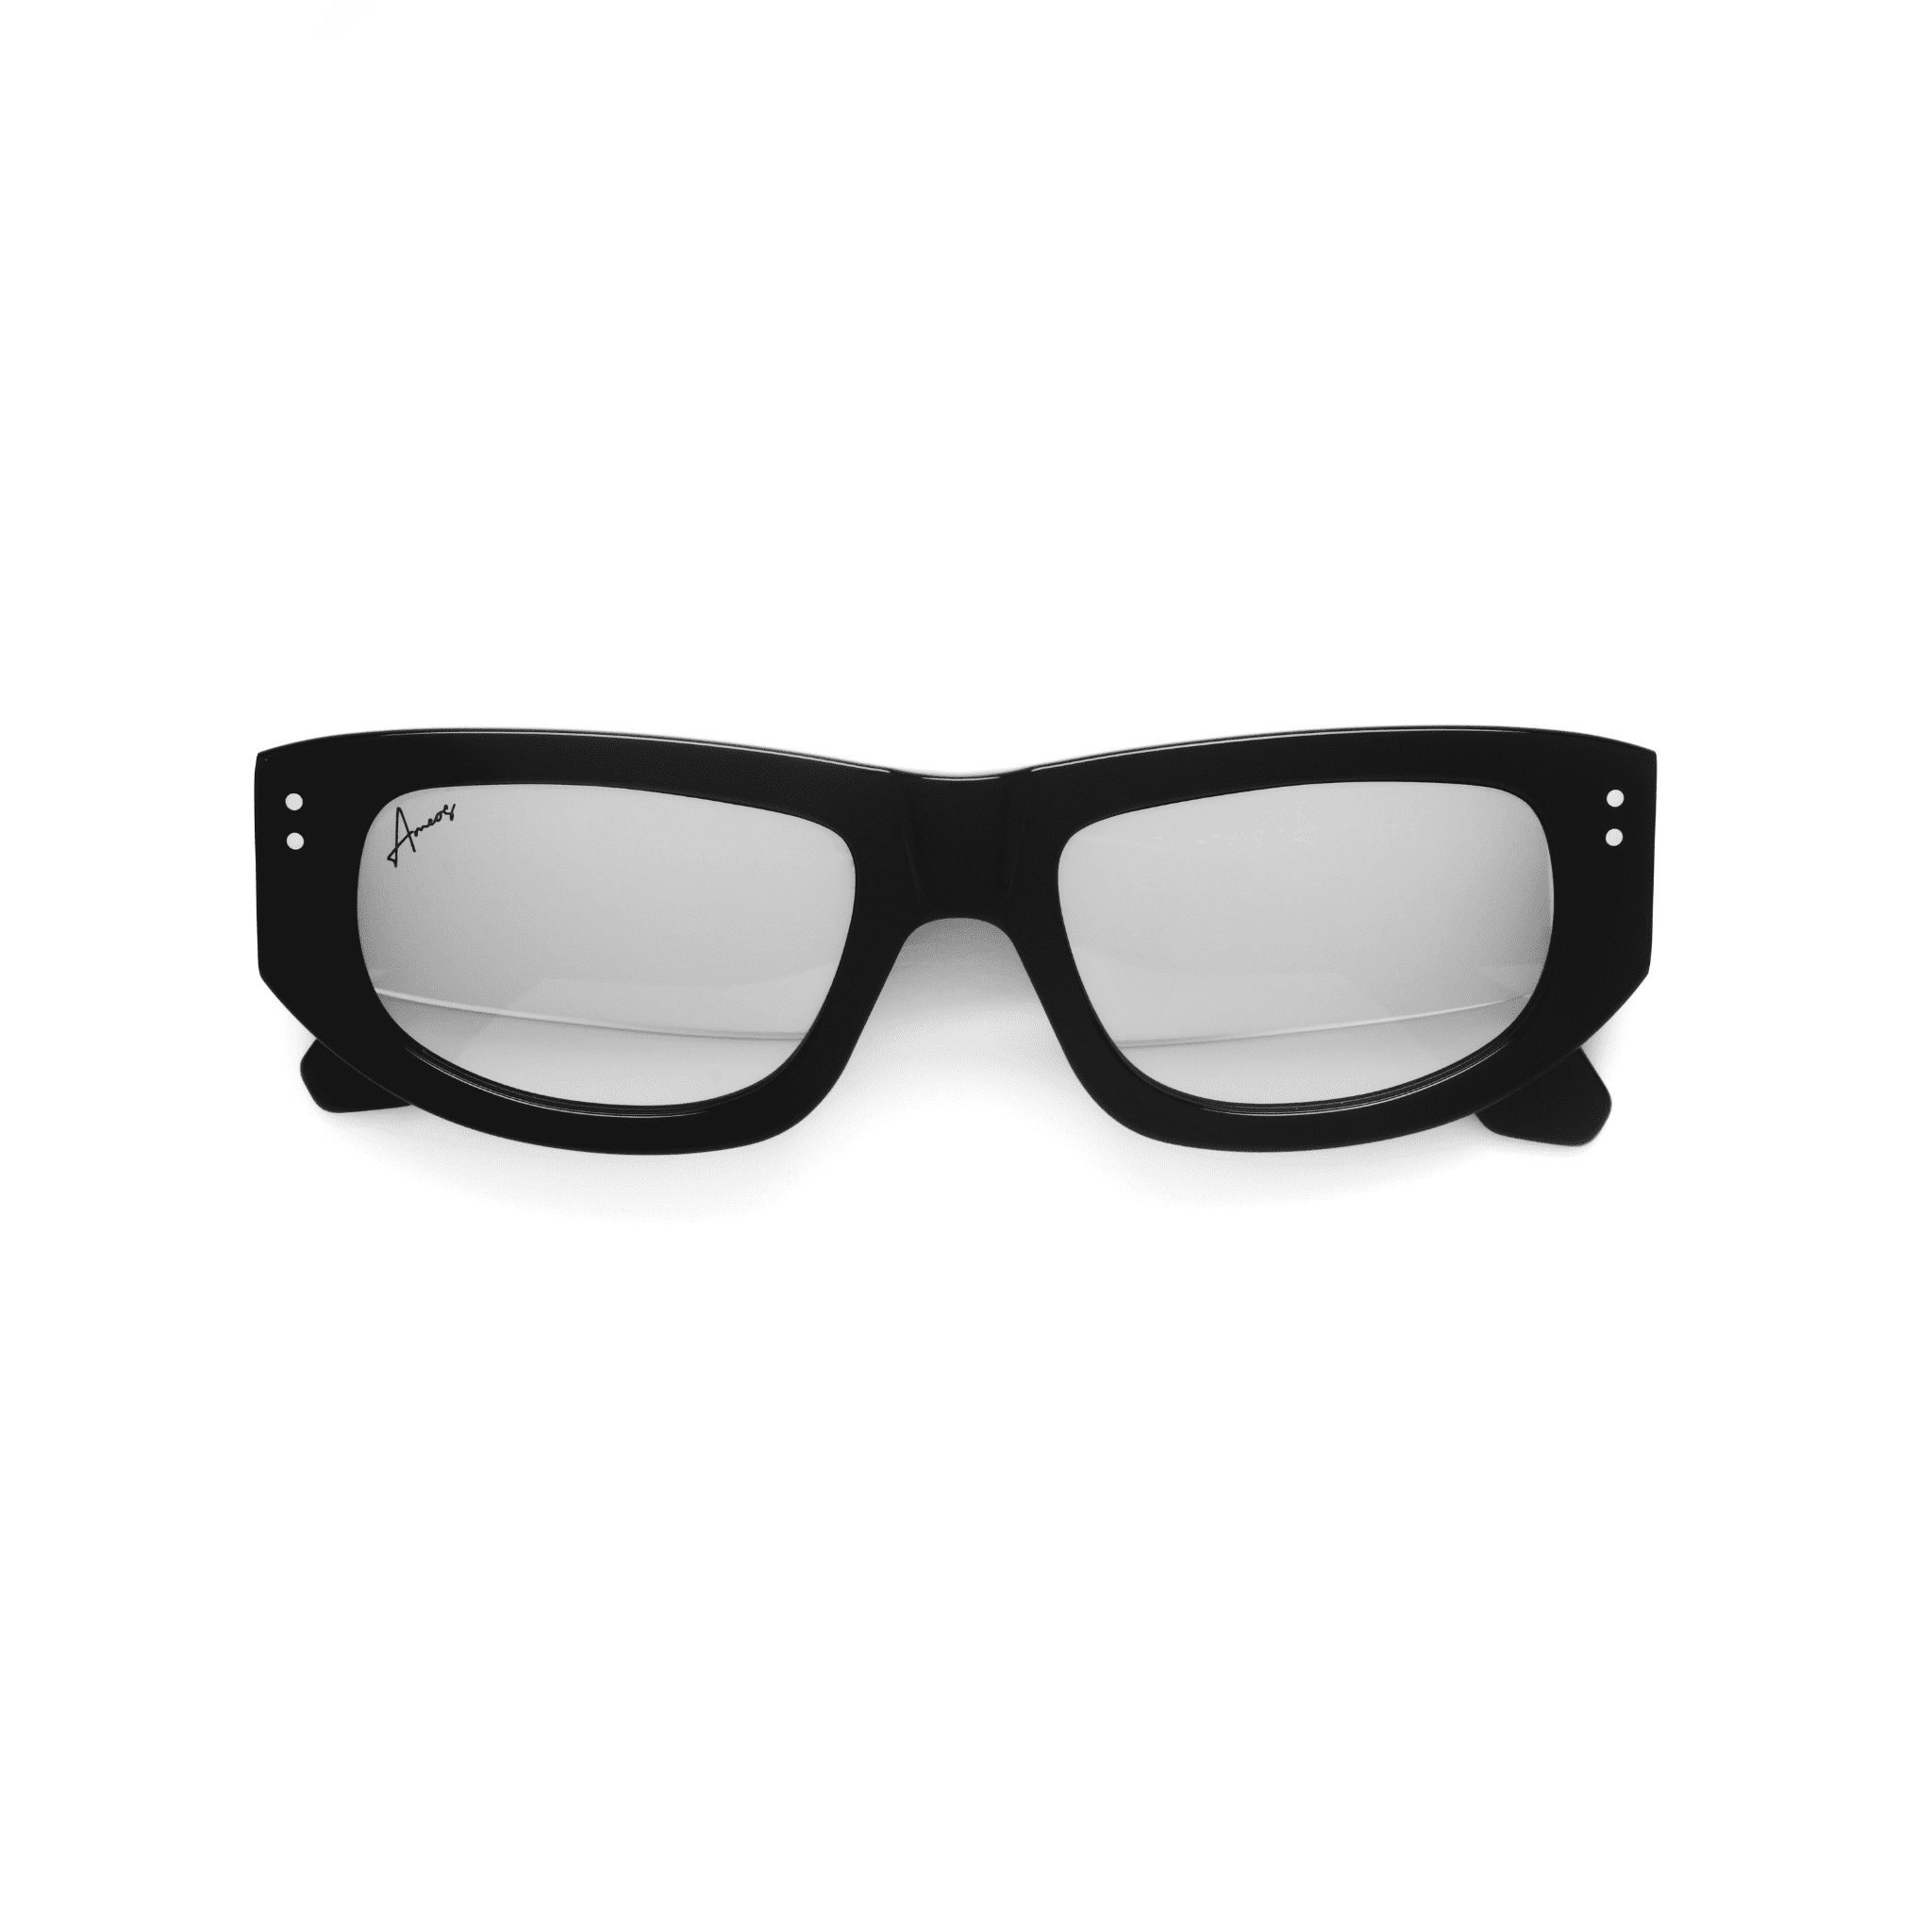 Ameos Forever collection Dex model. Black frames with silver, reflective lenses. Front view, temples crossed. Genderless, gender neutral eyewear